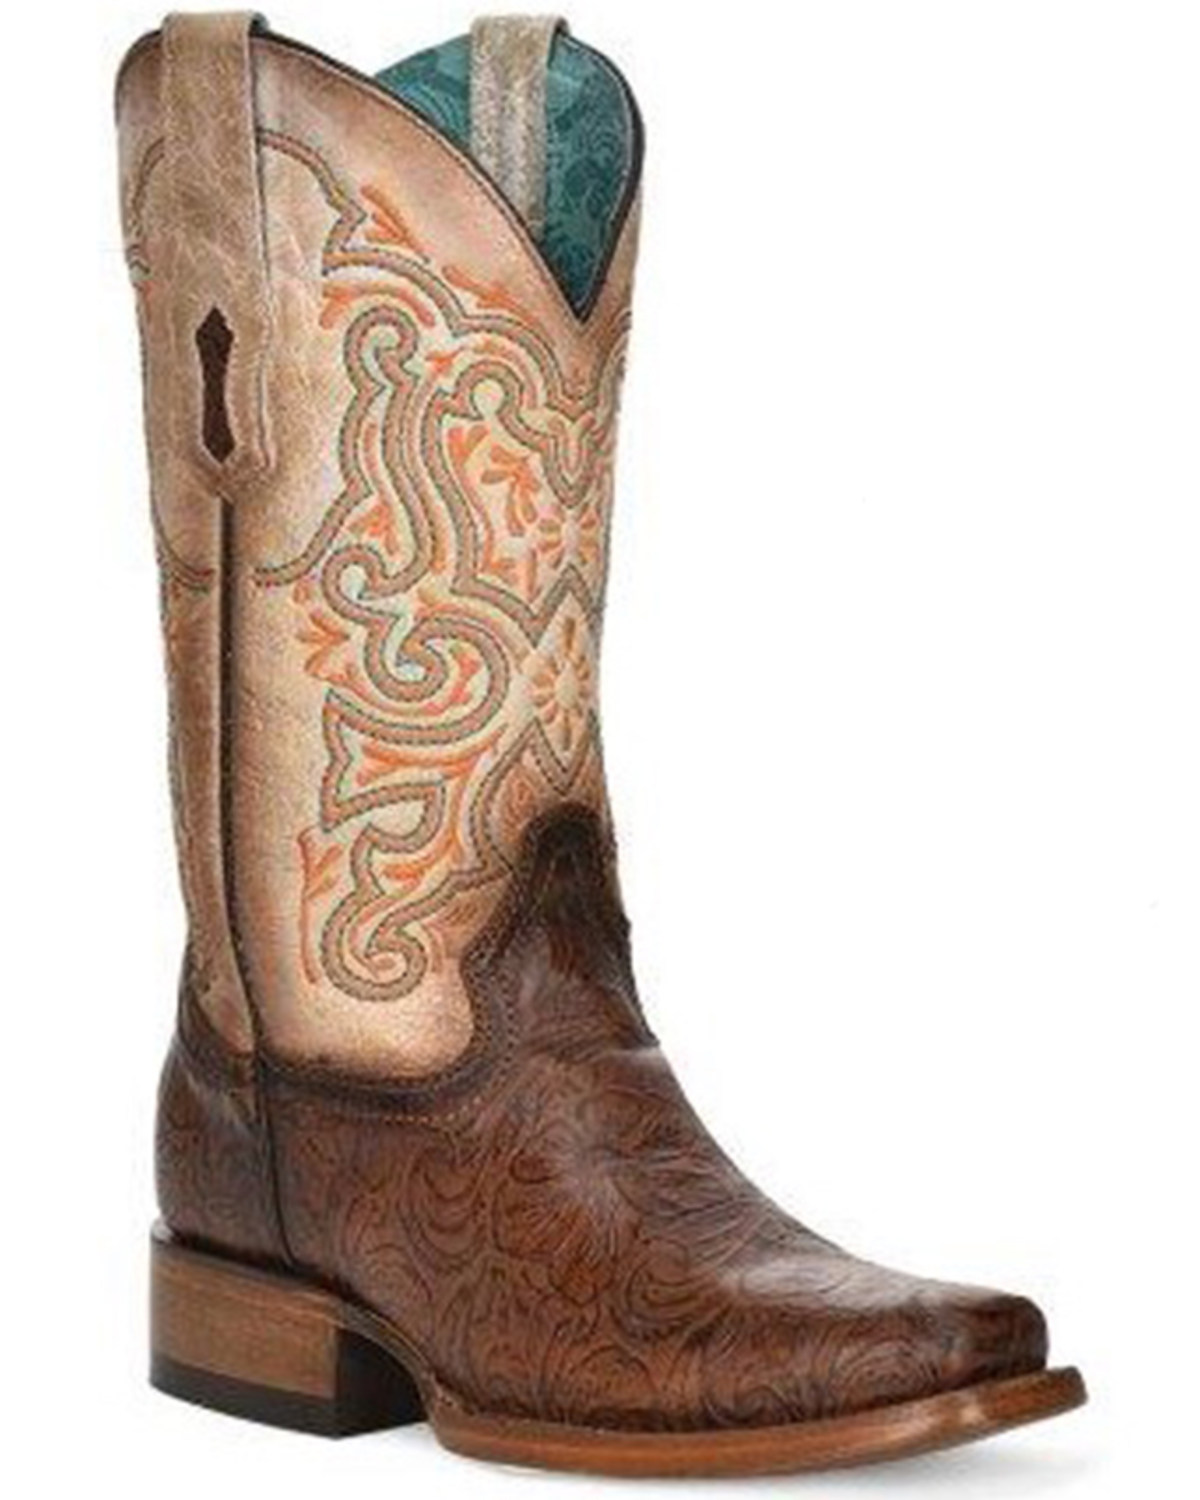 Corral Women's Floral Western Boots